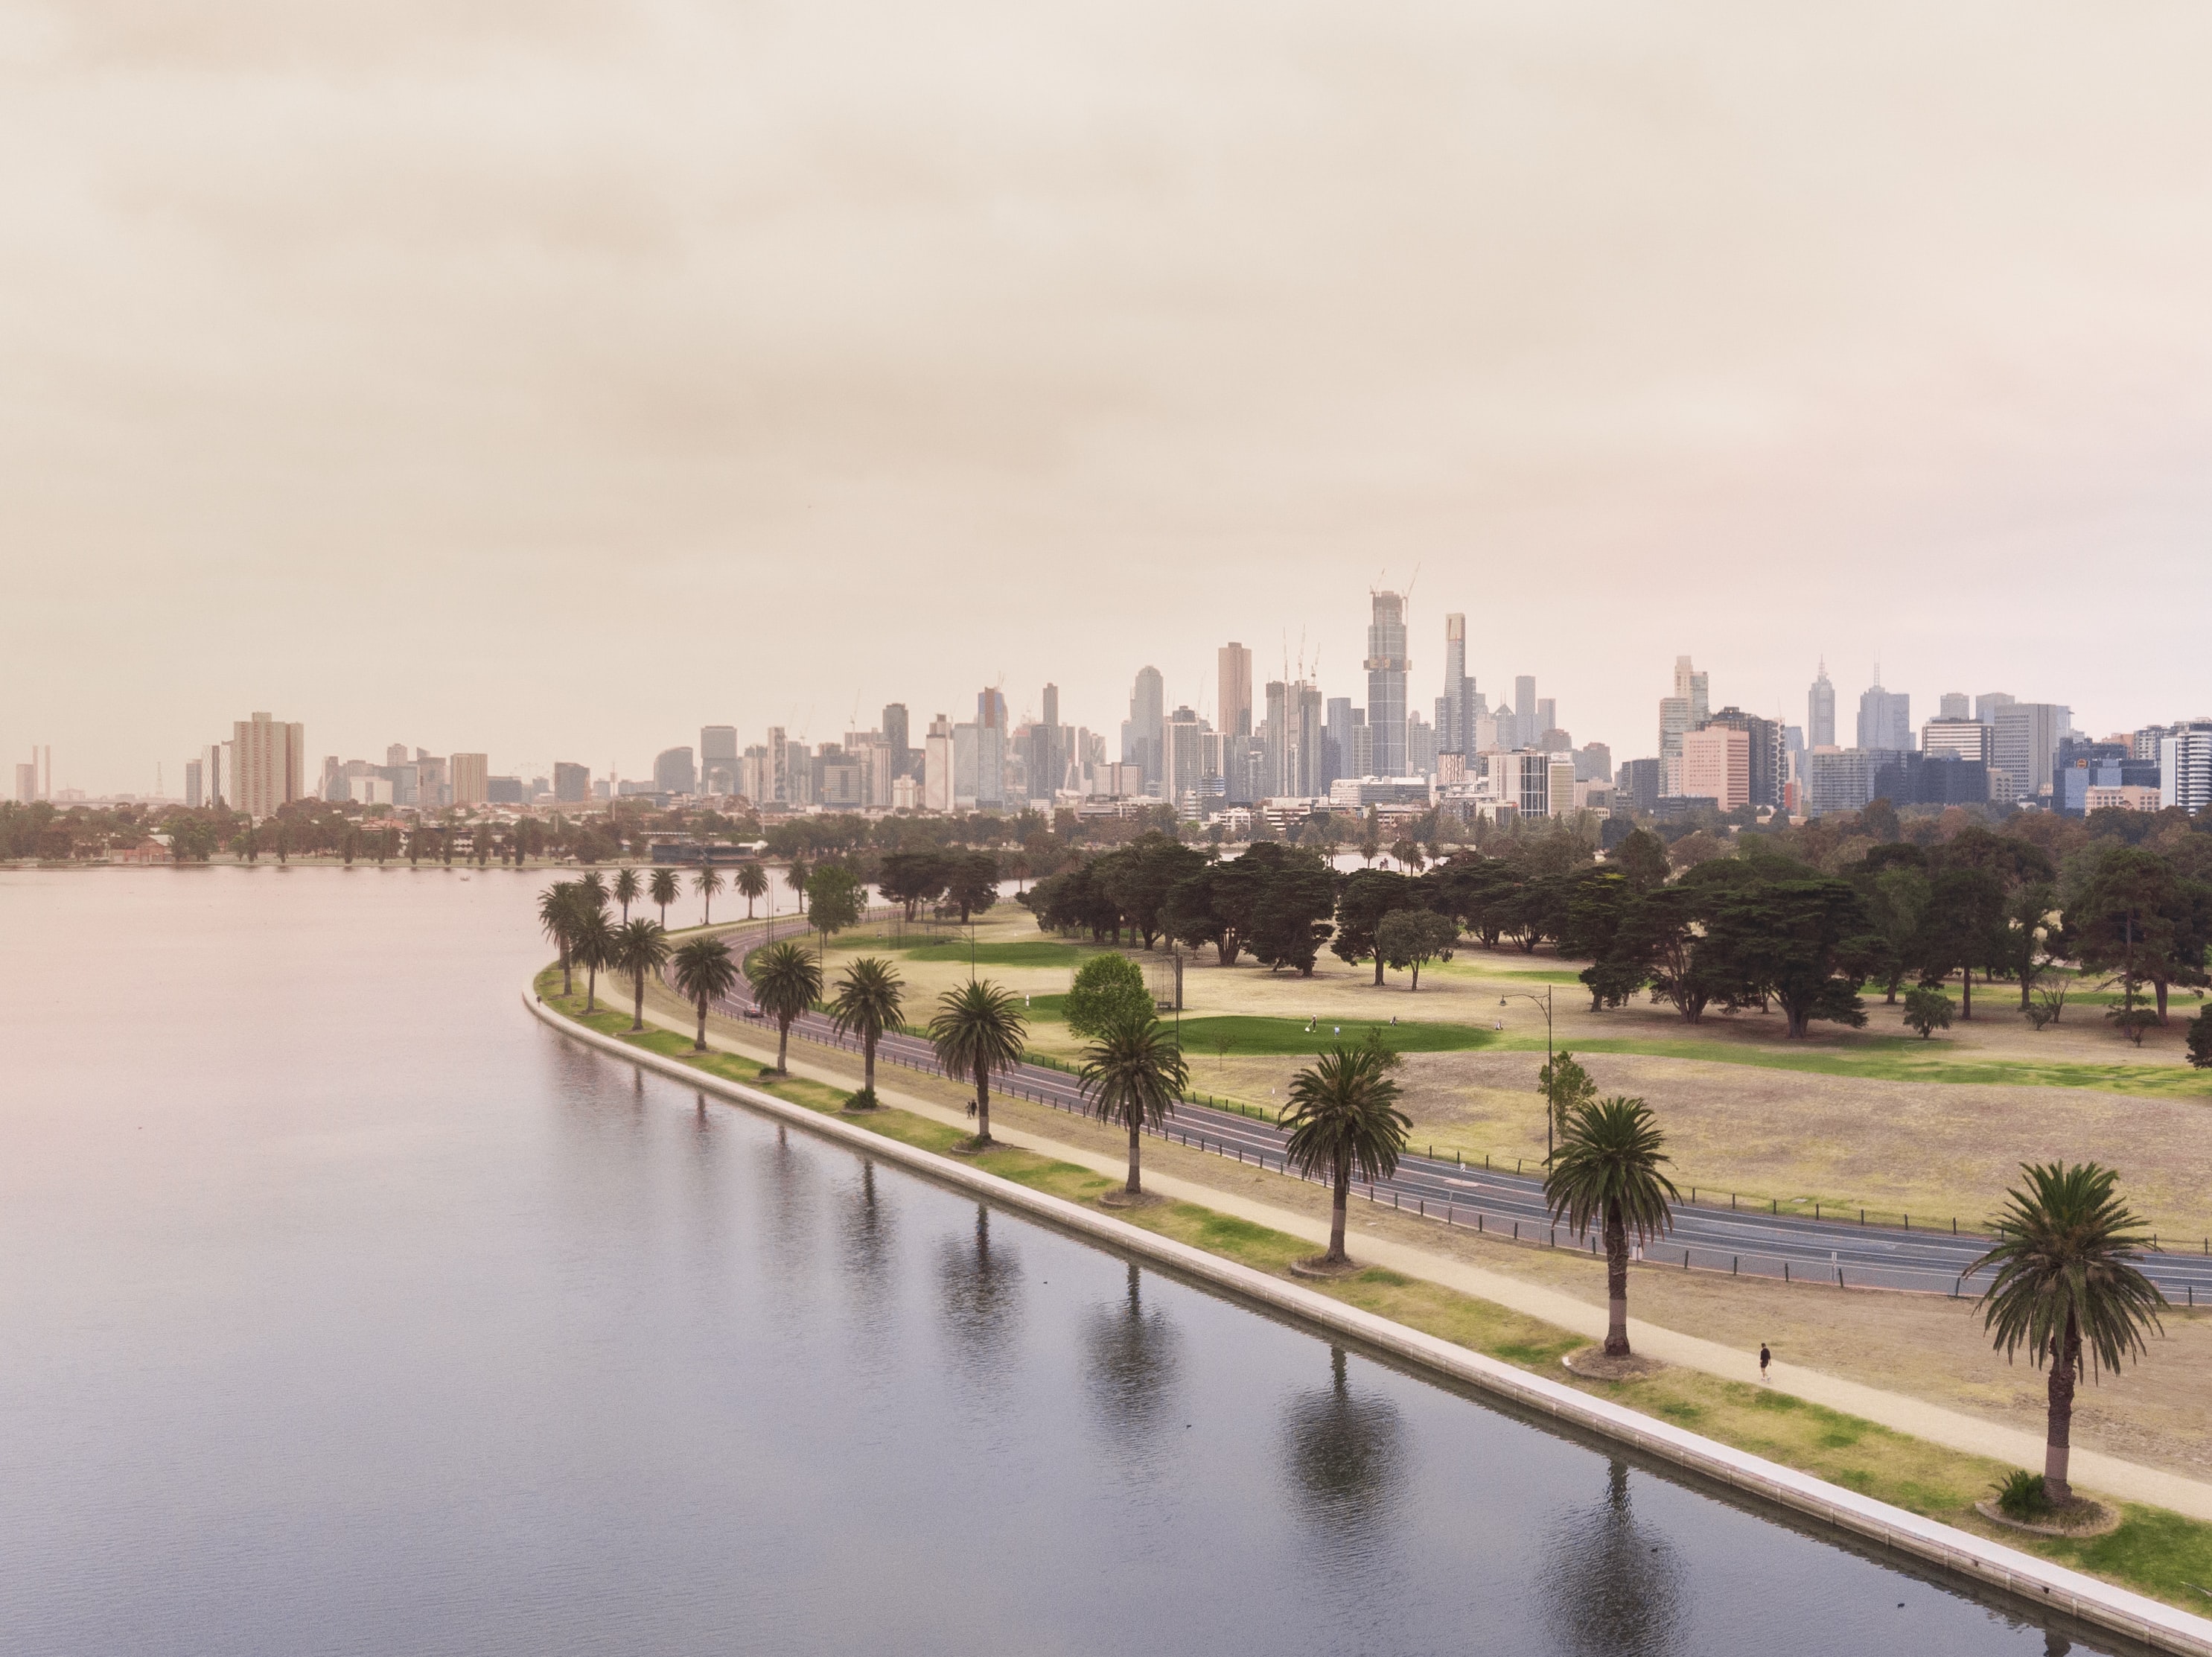 Melbourne places top in APAC for sustainability